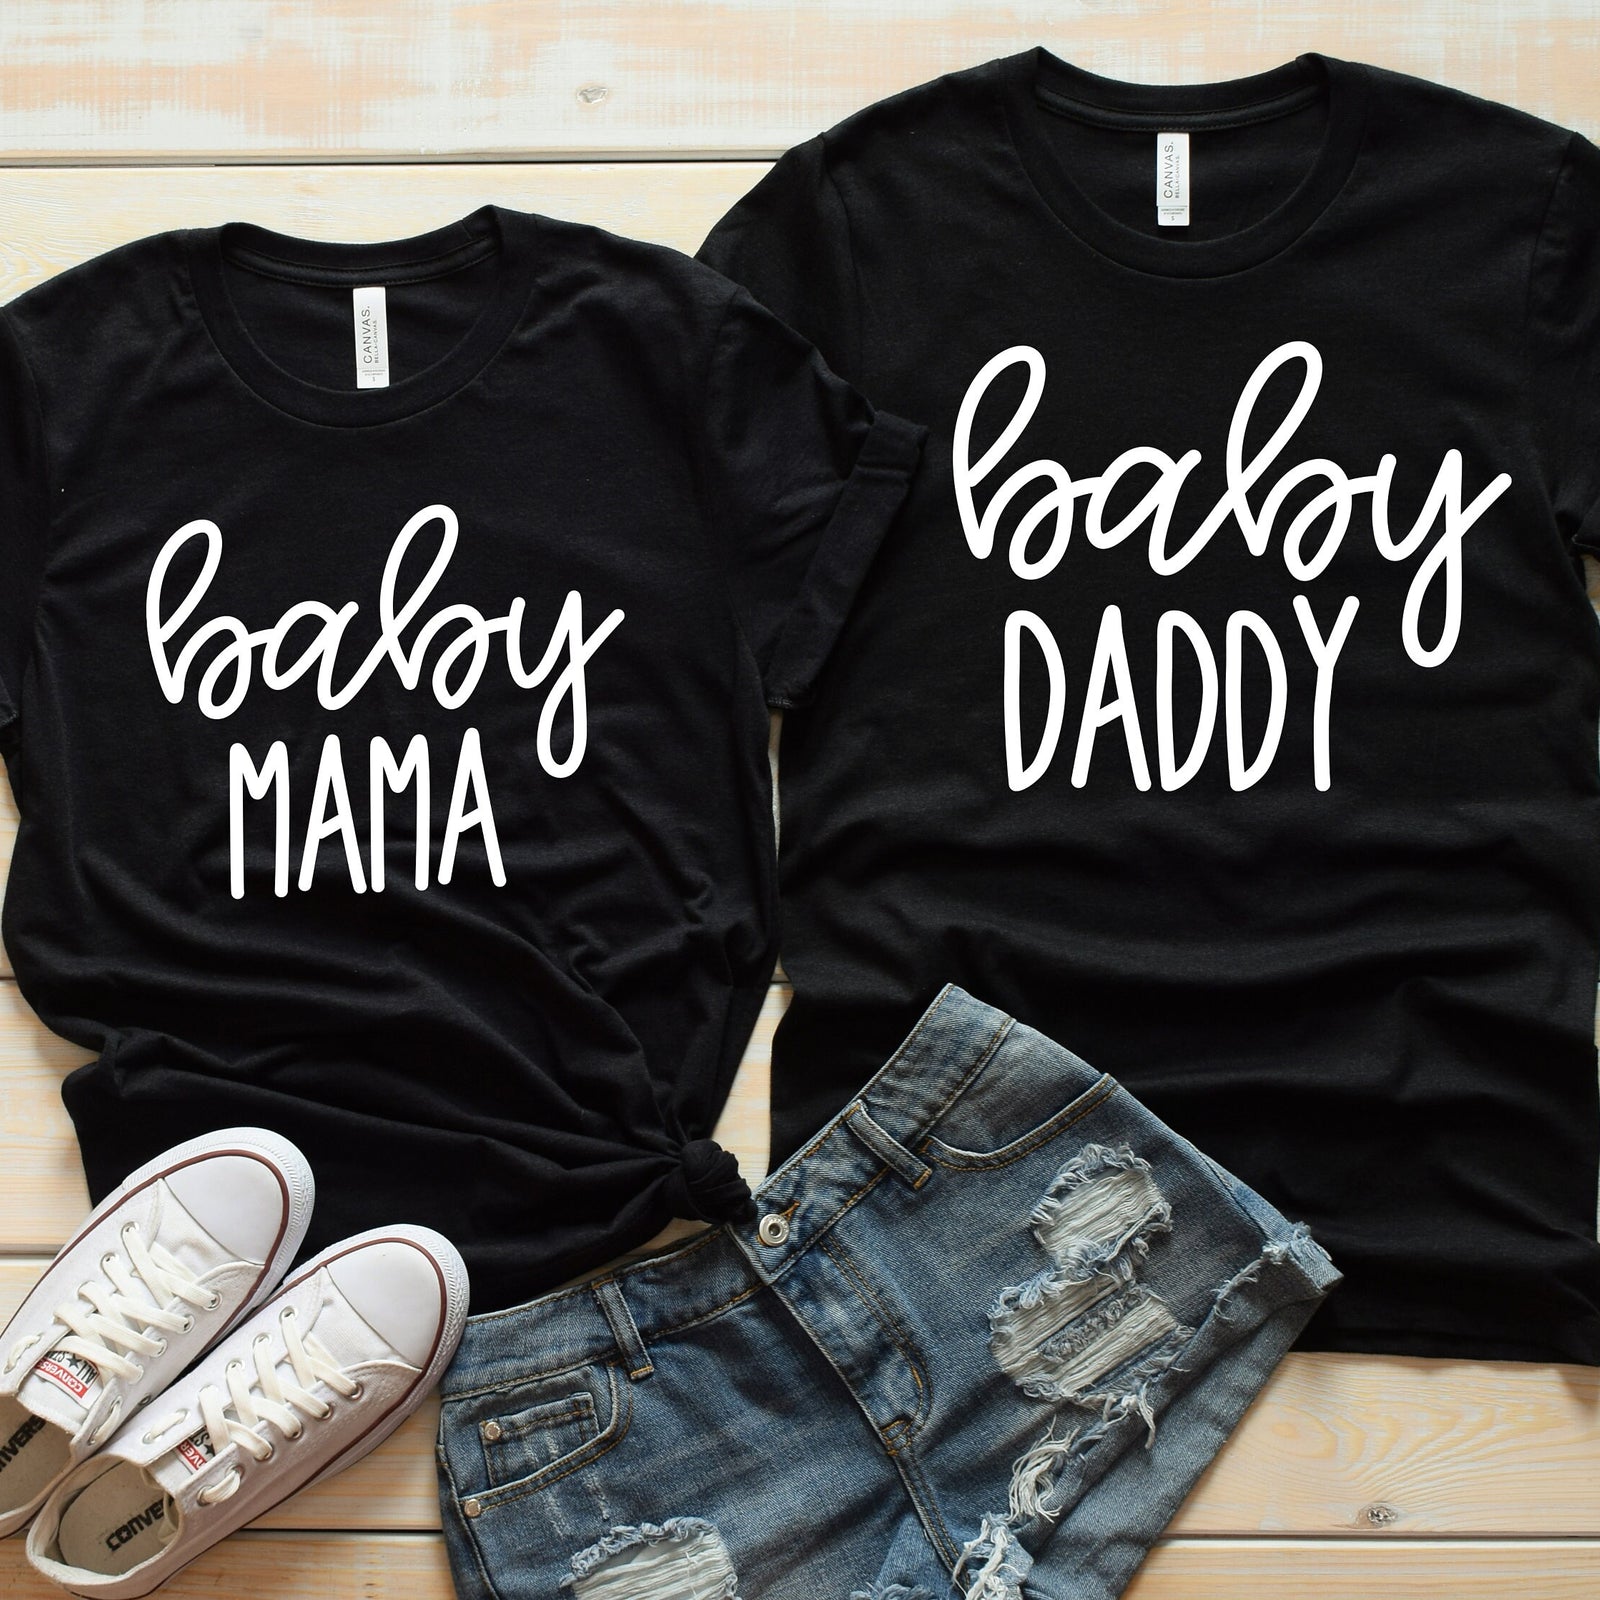 Baby Mama and Baby Daddy Couples Shirts - Matching Parents Shirts - Cute Pregnancy Announcement - Reveal